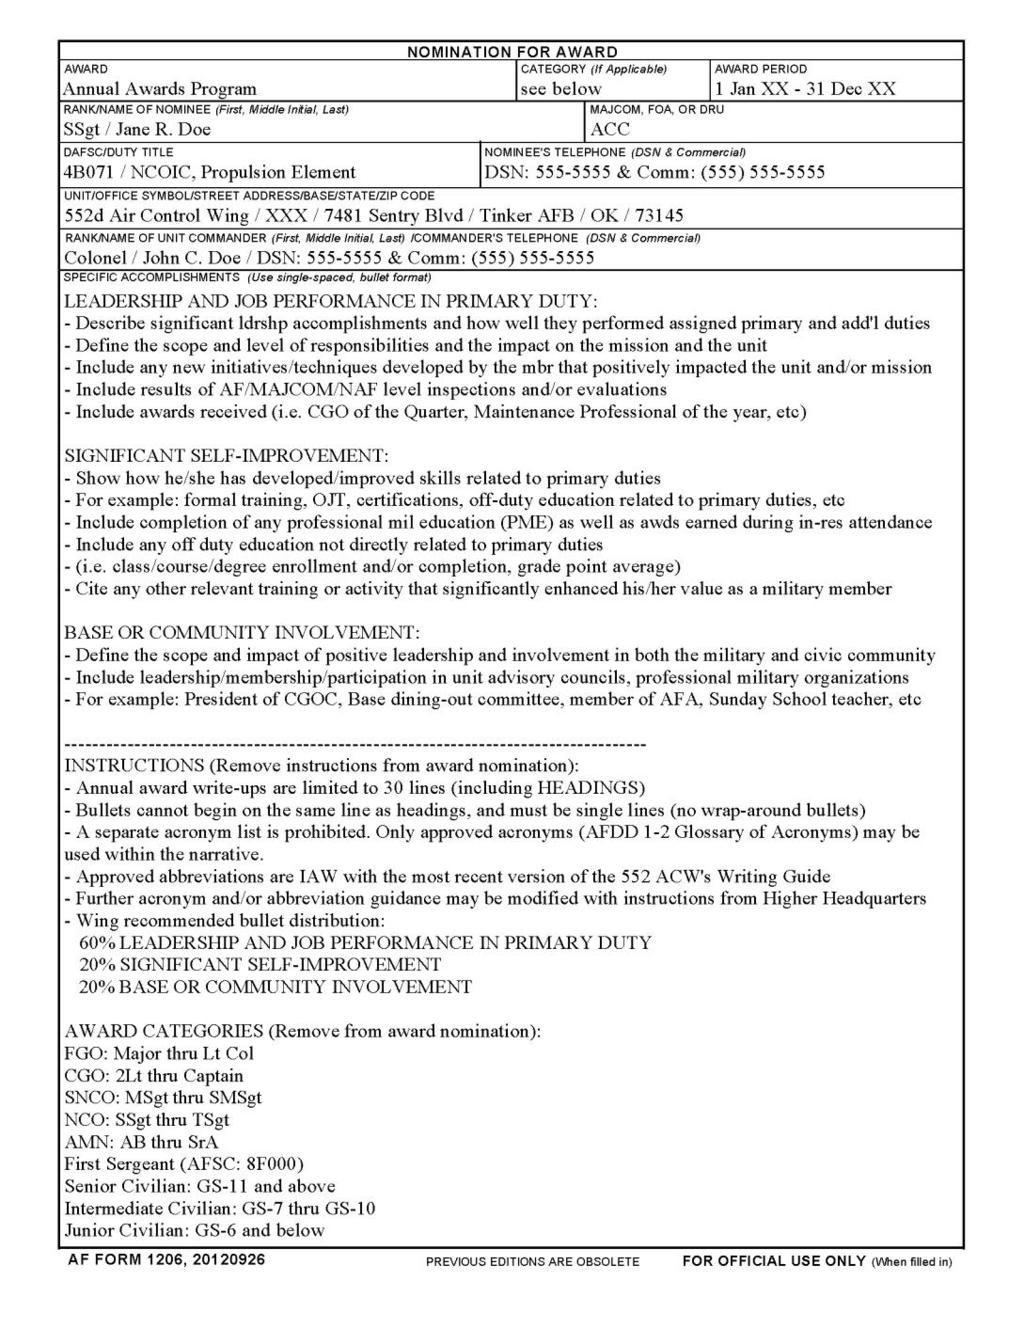 552ACWI36-2801 1 MAY 2014 19 Attachment 9 SAMPLE AF FORM 1206,